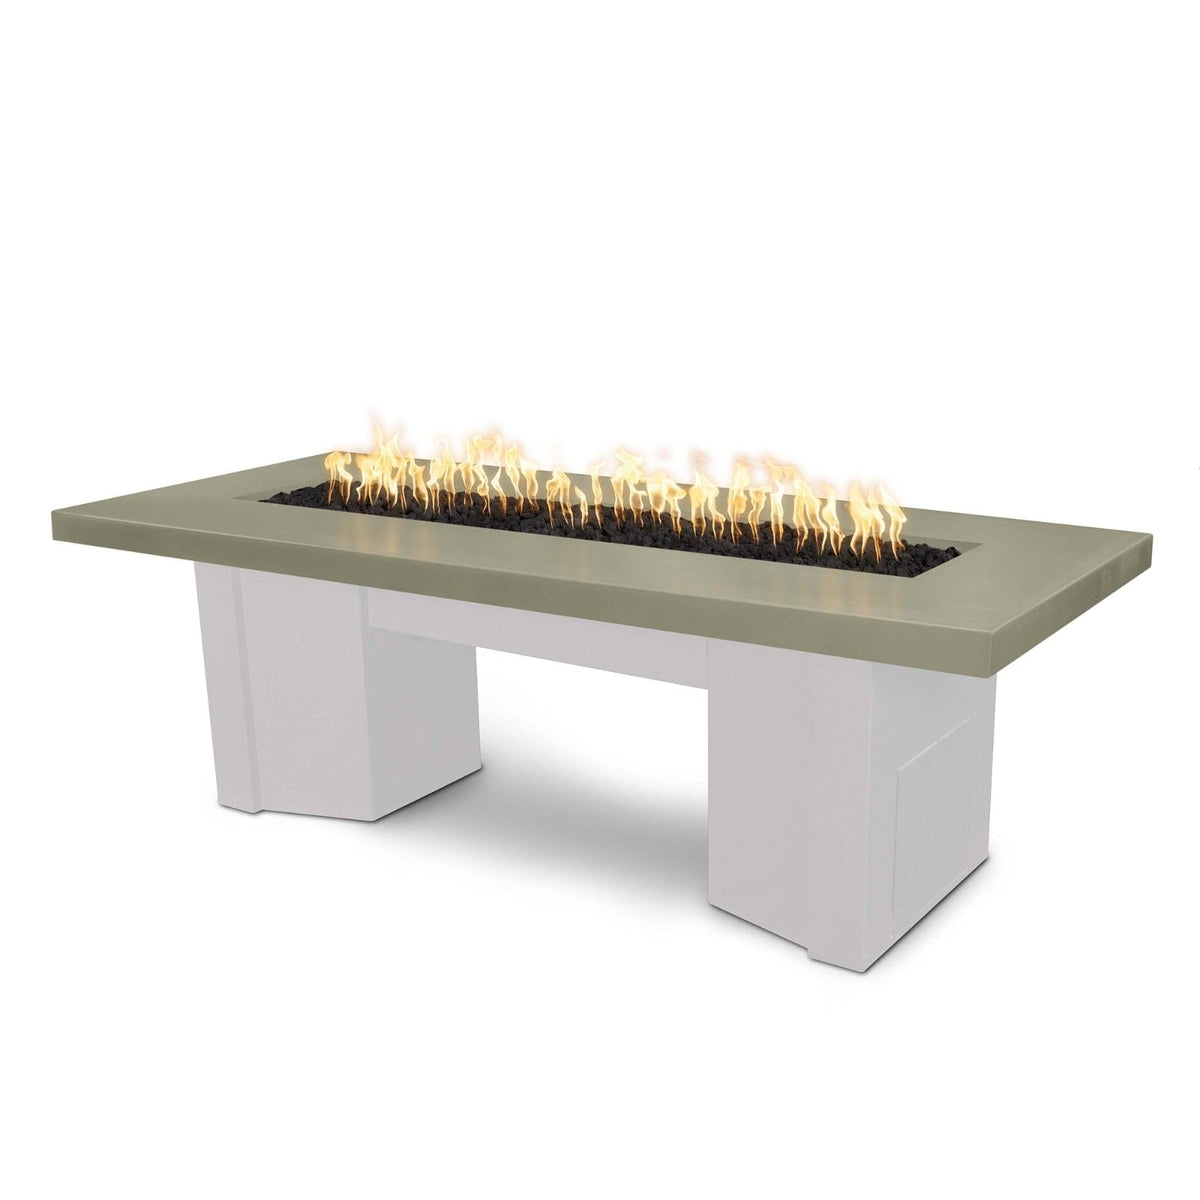 The Outdoor Plus Fire Features Ash (-ASH) / White Powder Coated Steel (-WHT) The Outdoor Plus 78&quot; Alameda Fire Table Smooth Concrete in Liquid Propane - Match Lit with Flame Sense System / OPT-ALMGFRC78FSML-LP